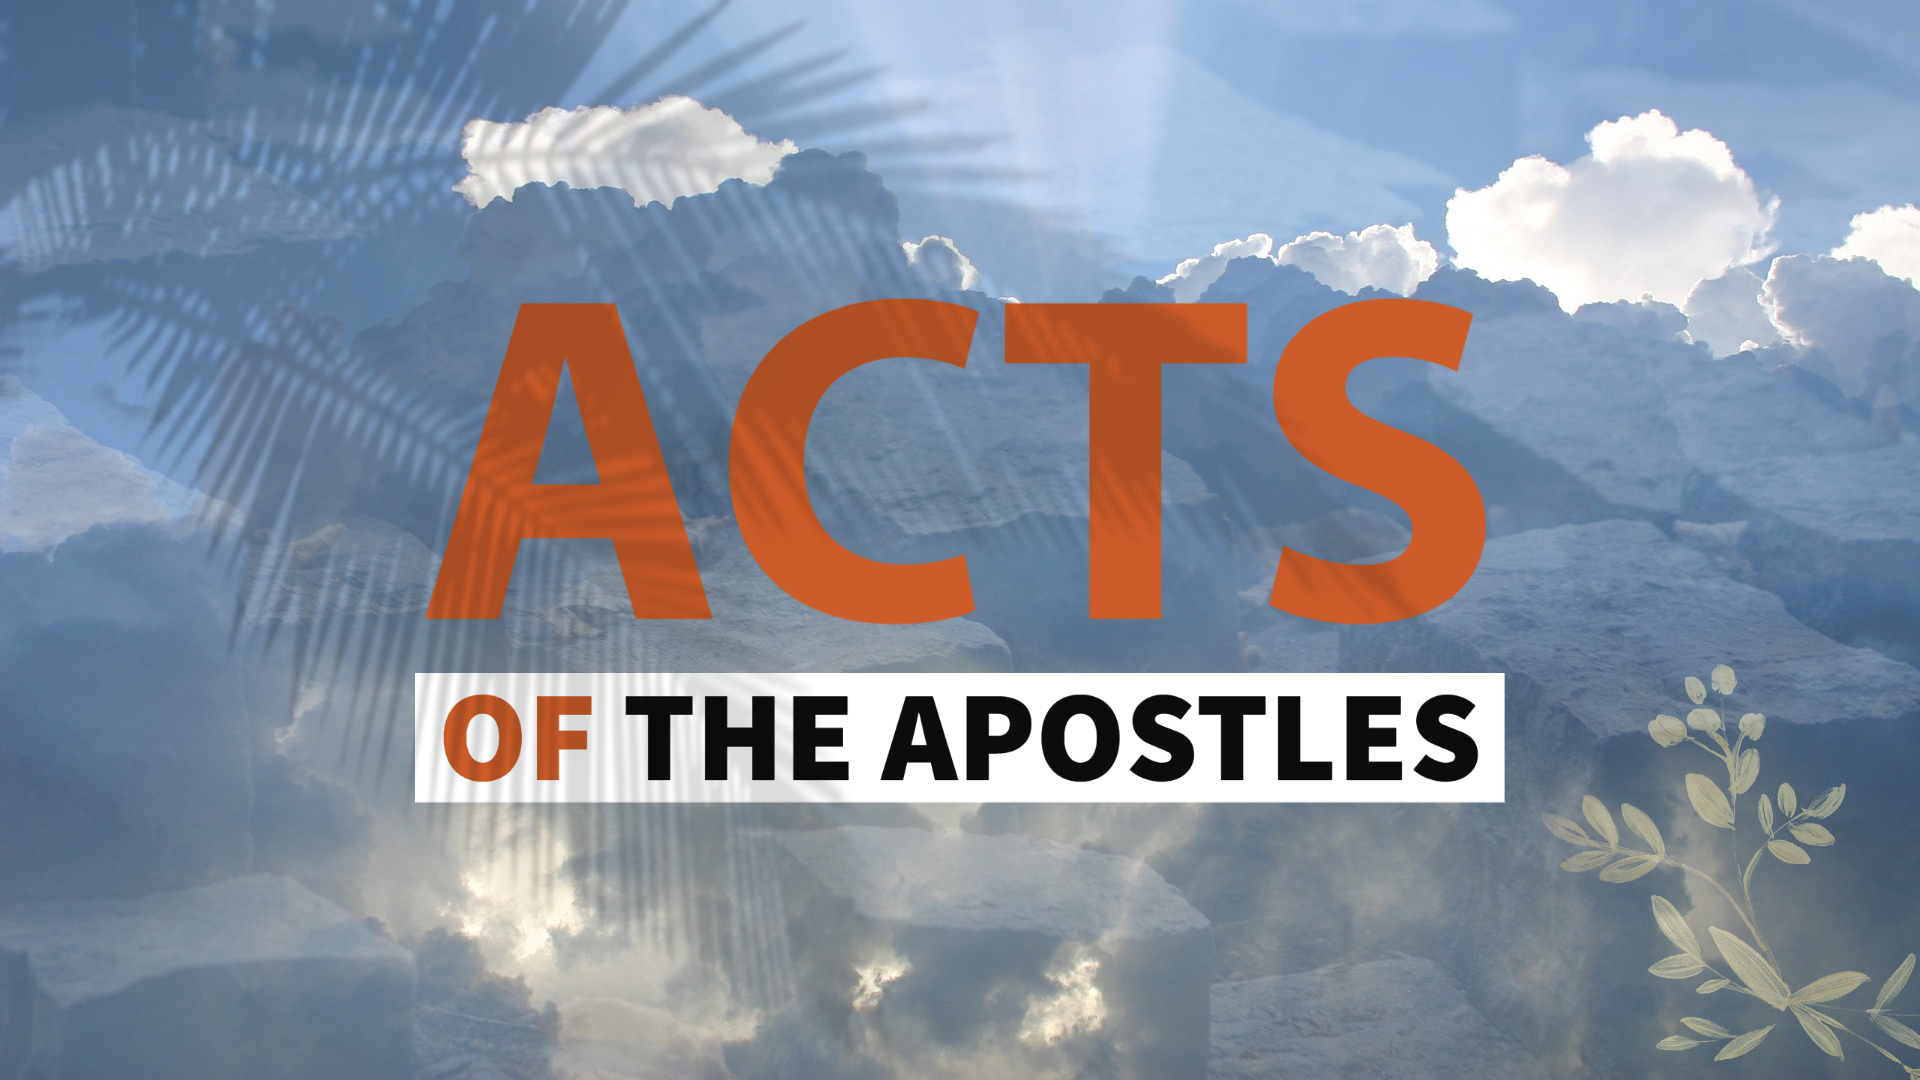 Acts of the apostles